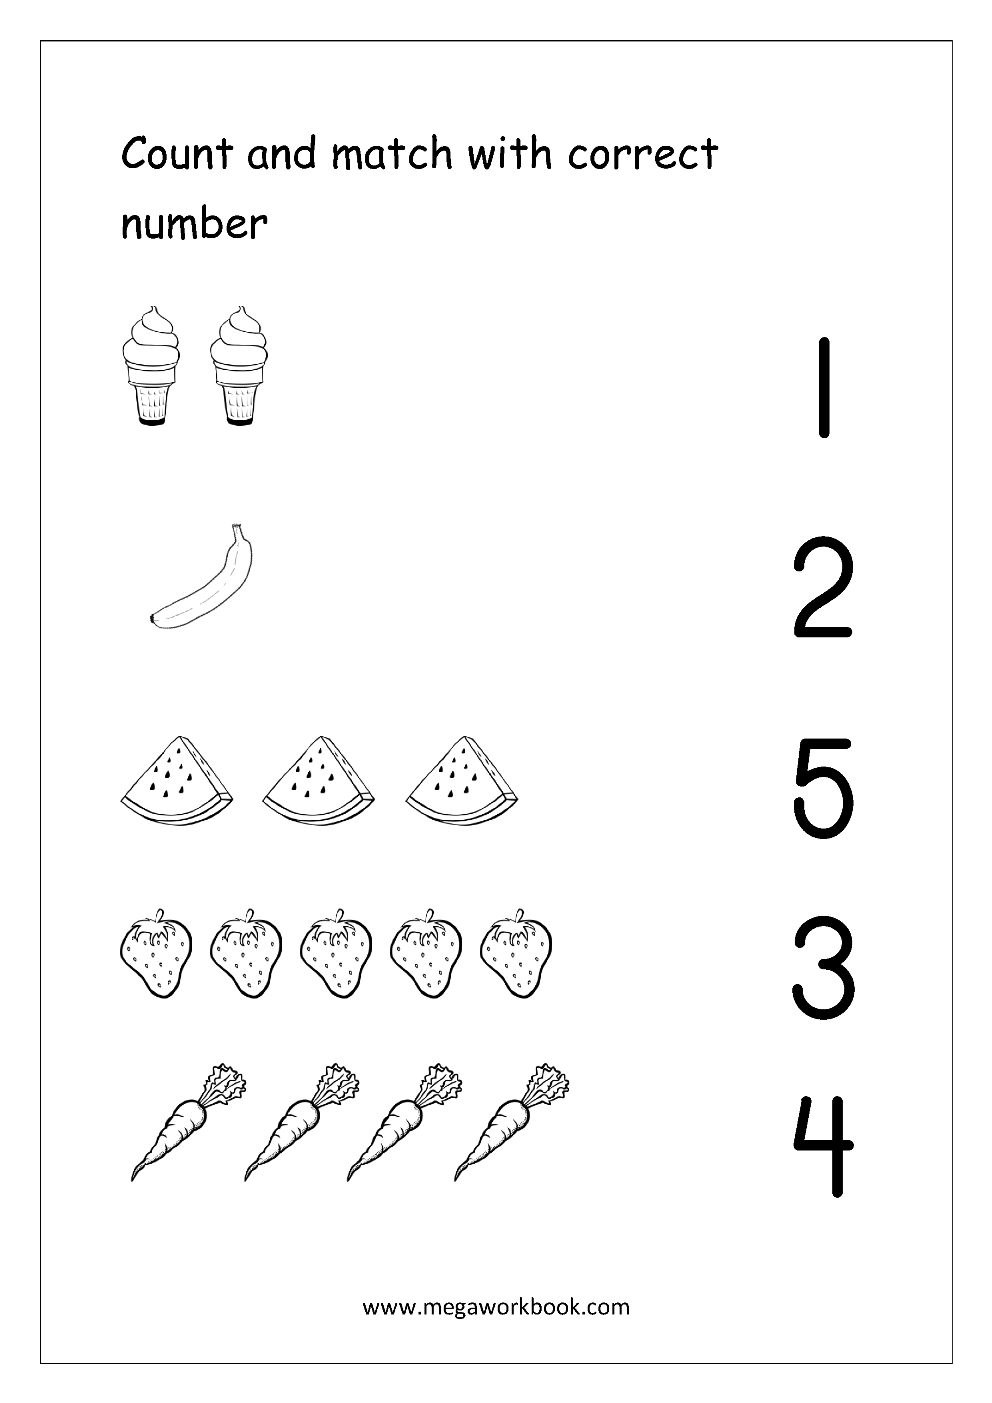 Free Printable Number Matching Worksheets For Kindergarten And Preschool - Count And Match (1-10) - Megaworkbook